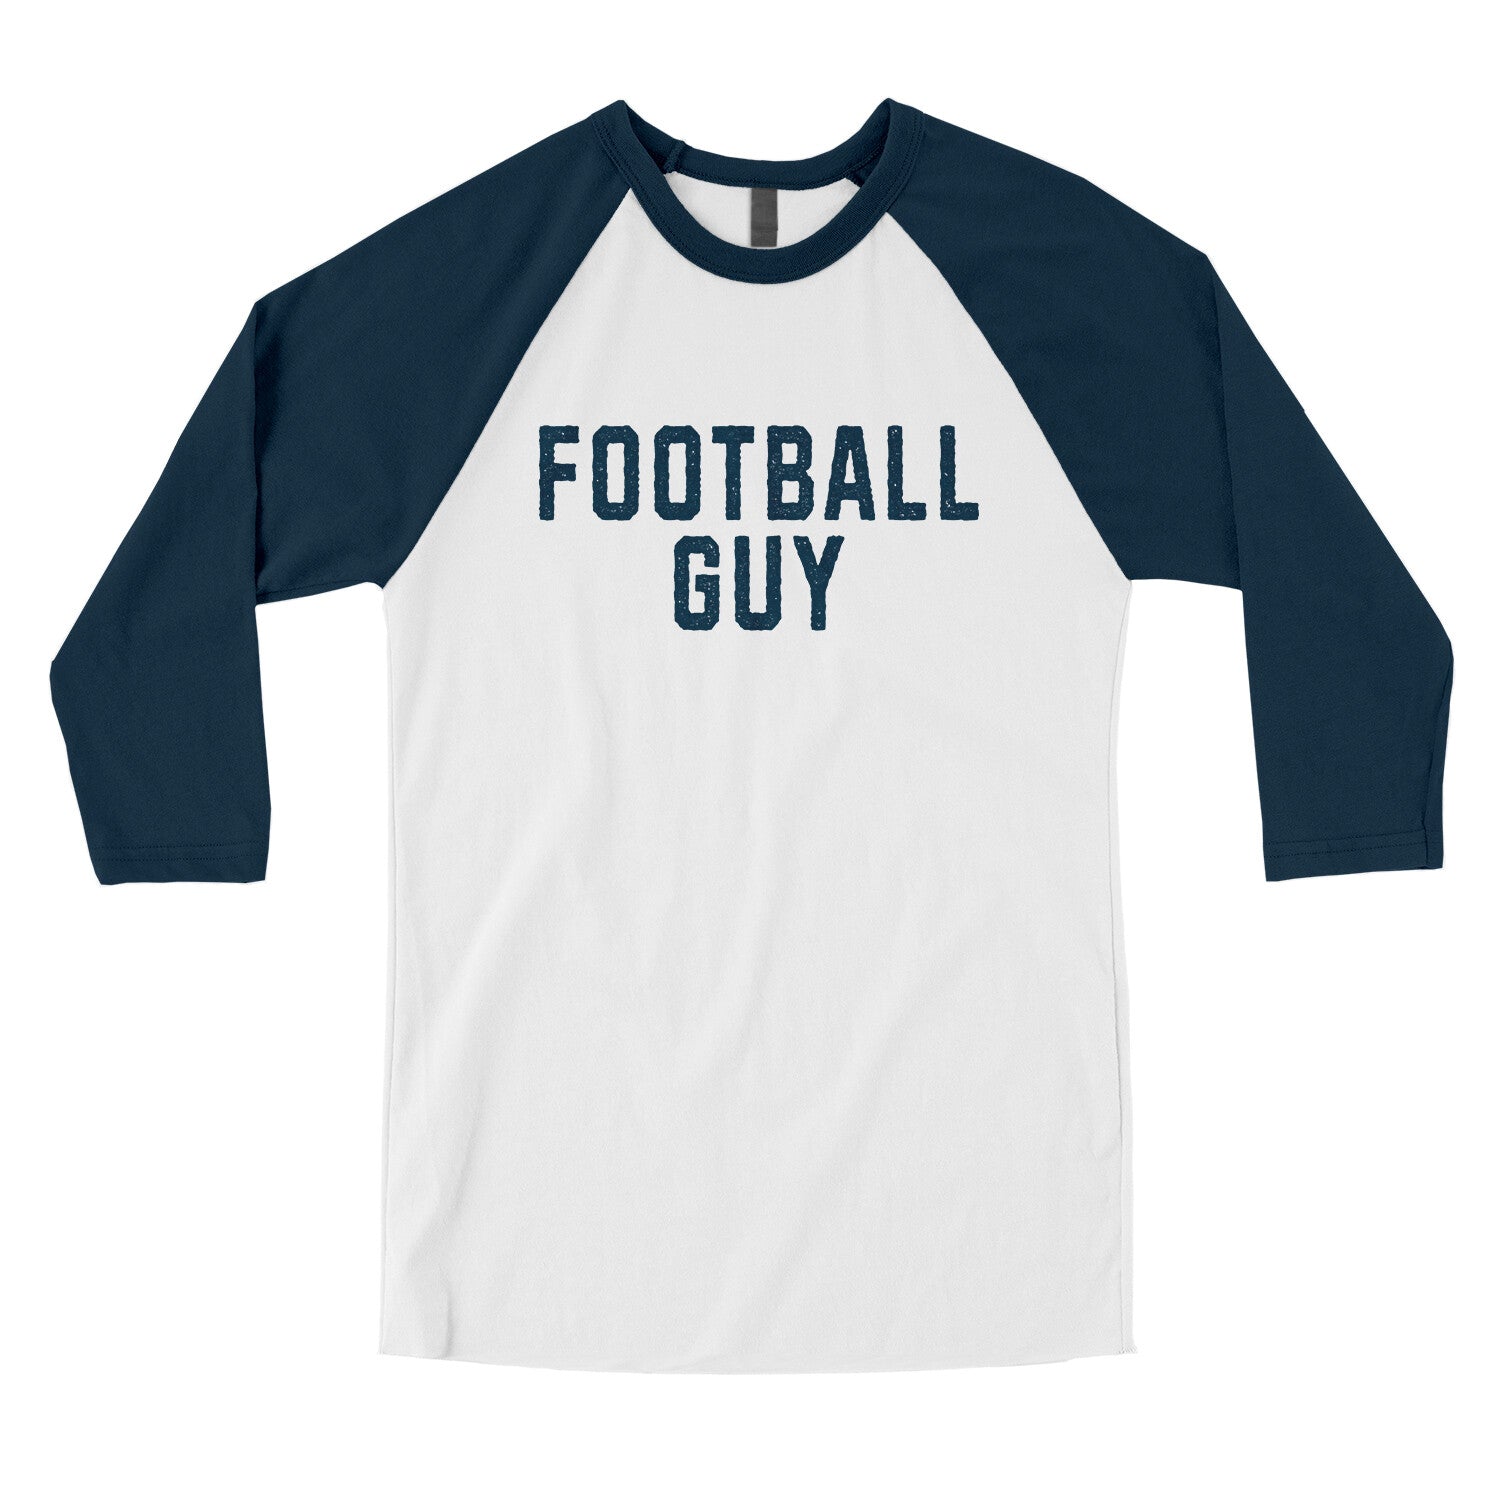 Football Guy in White with Navy Color